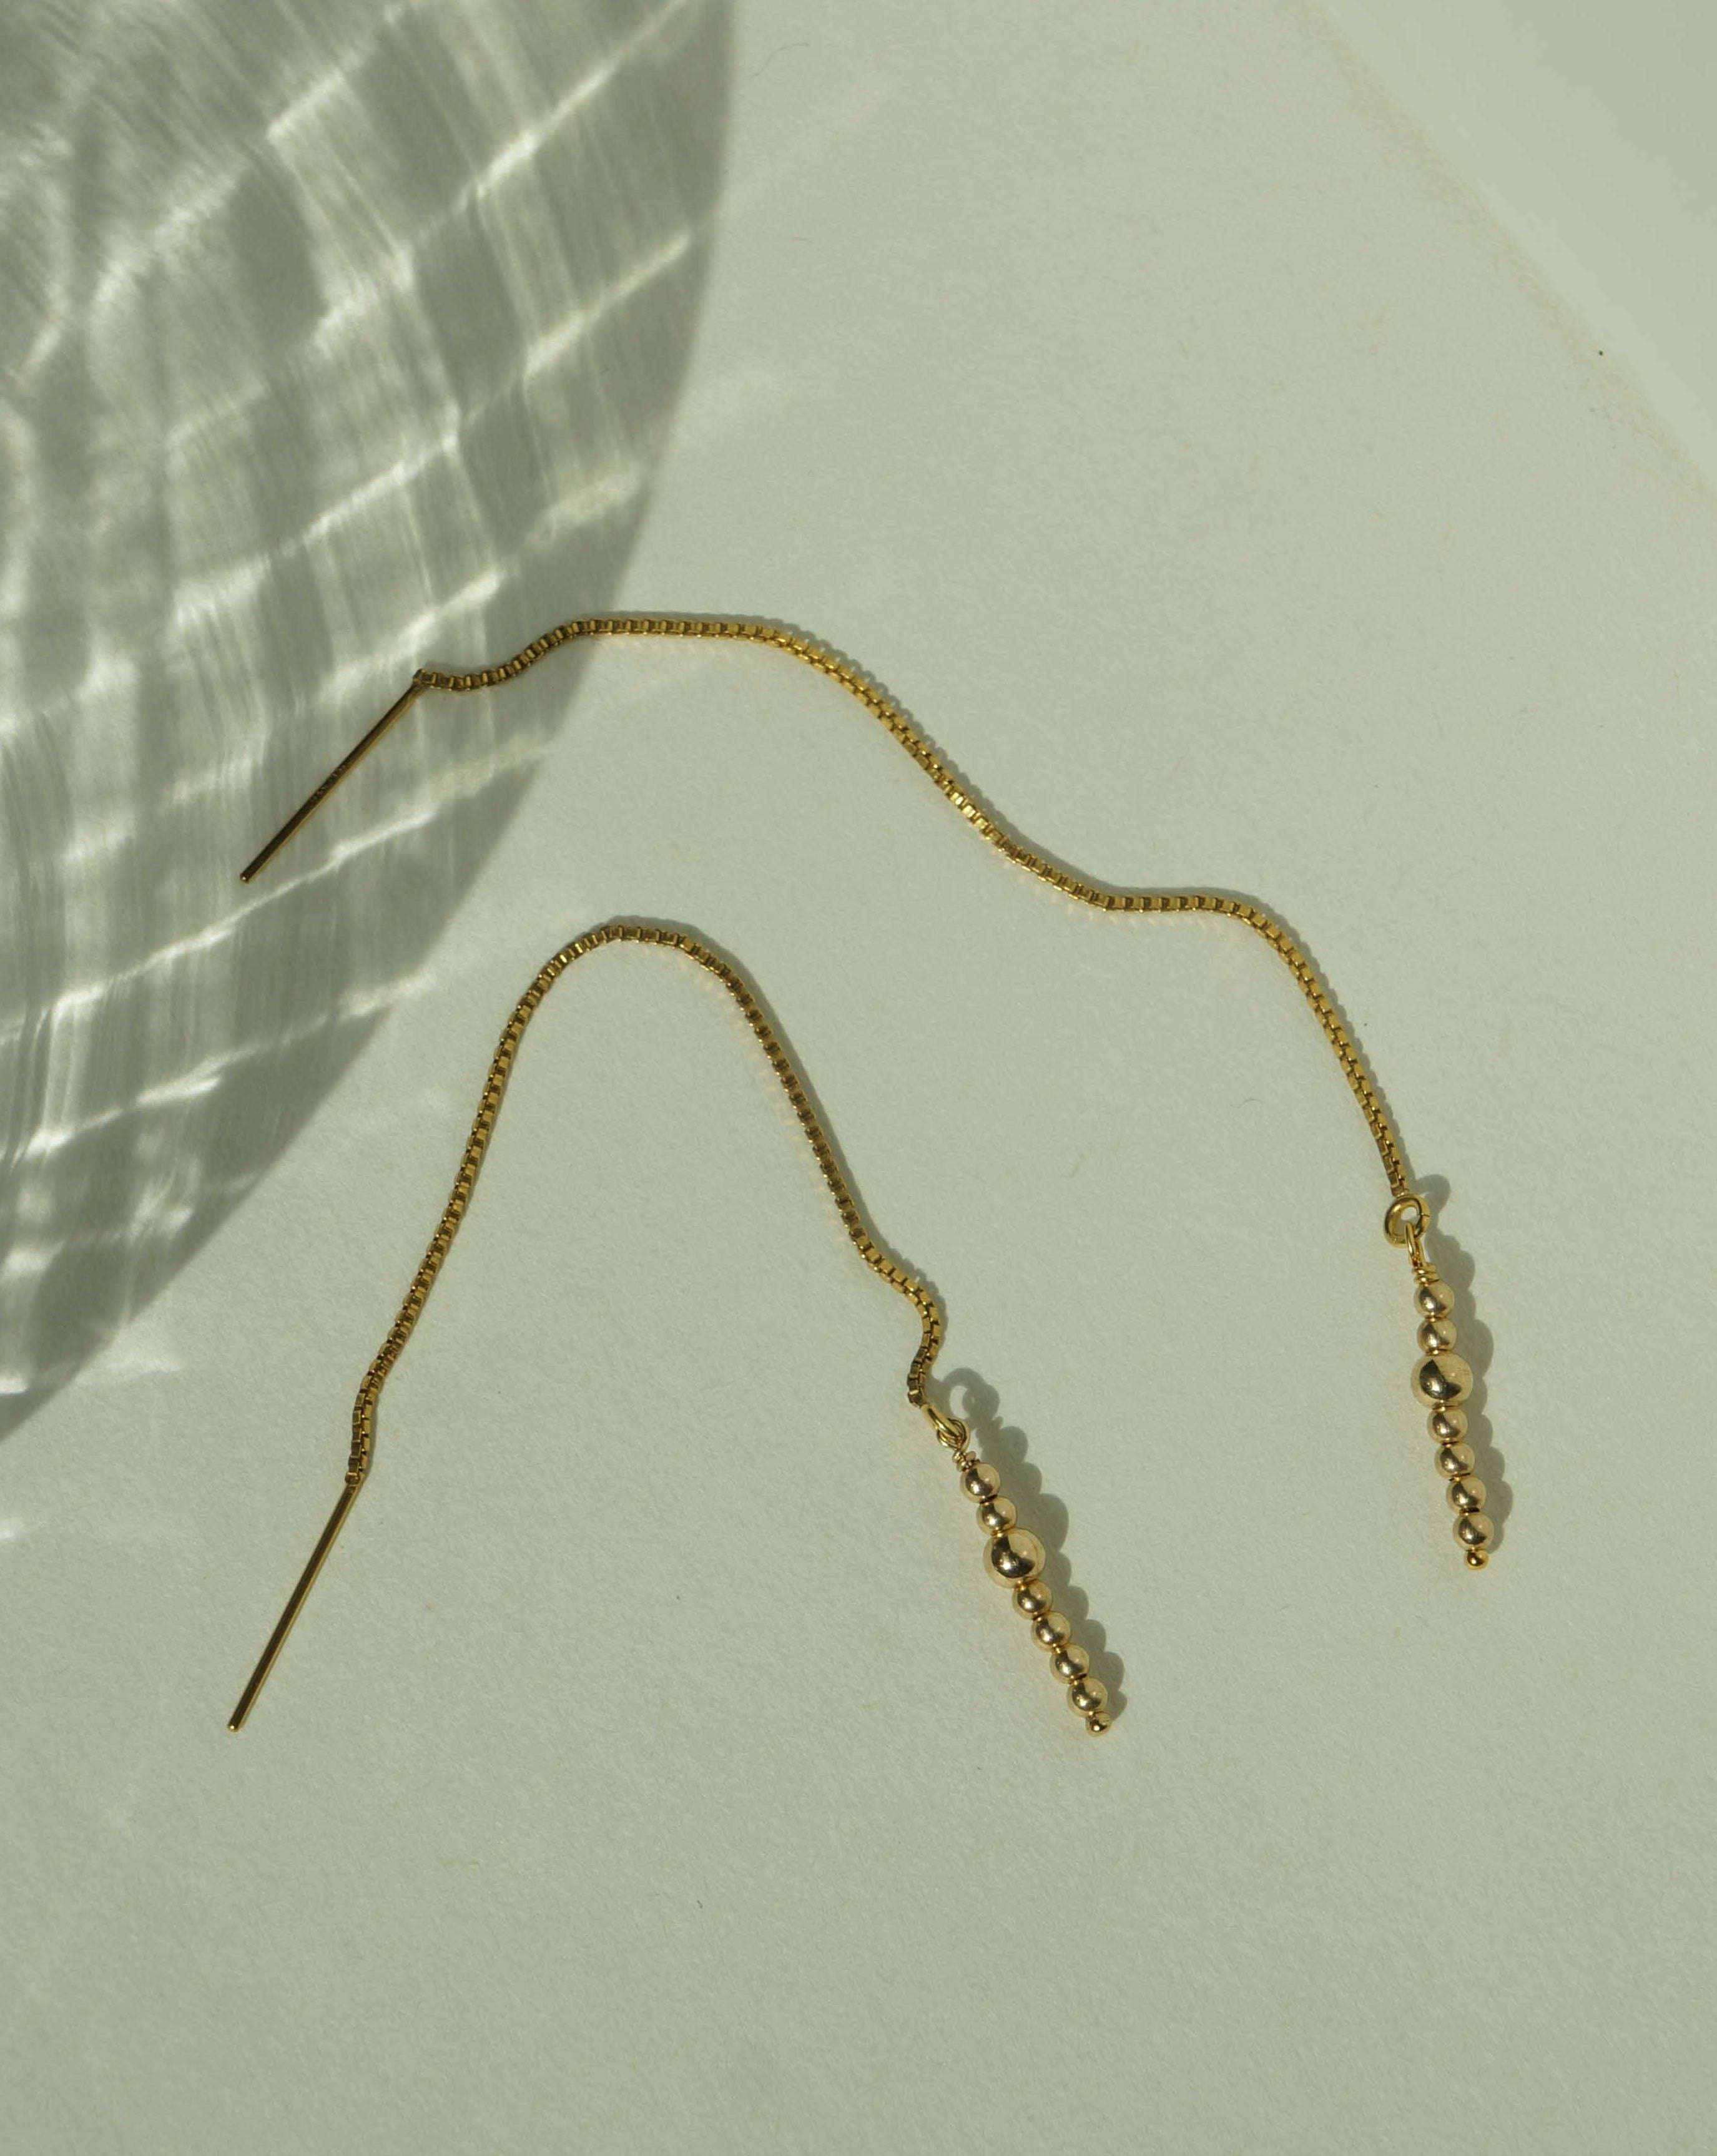 Lani Threader Earrings by KOZAKH. 1mm Box chain threader style earrings, crafted in 14K Gold Filled, featuring gold balls.